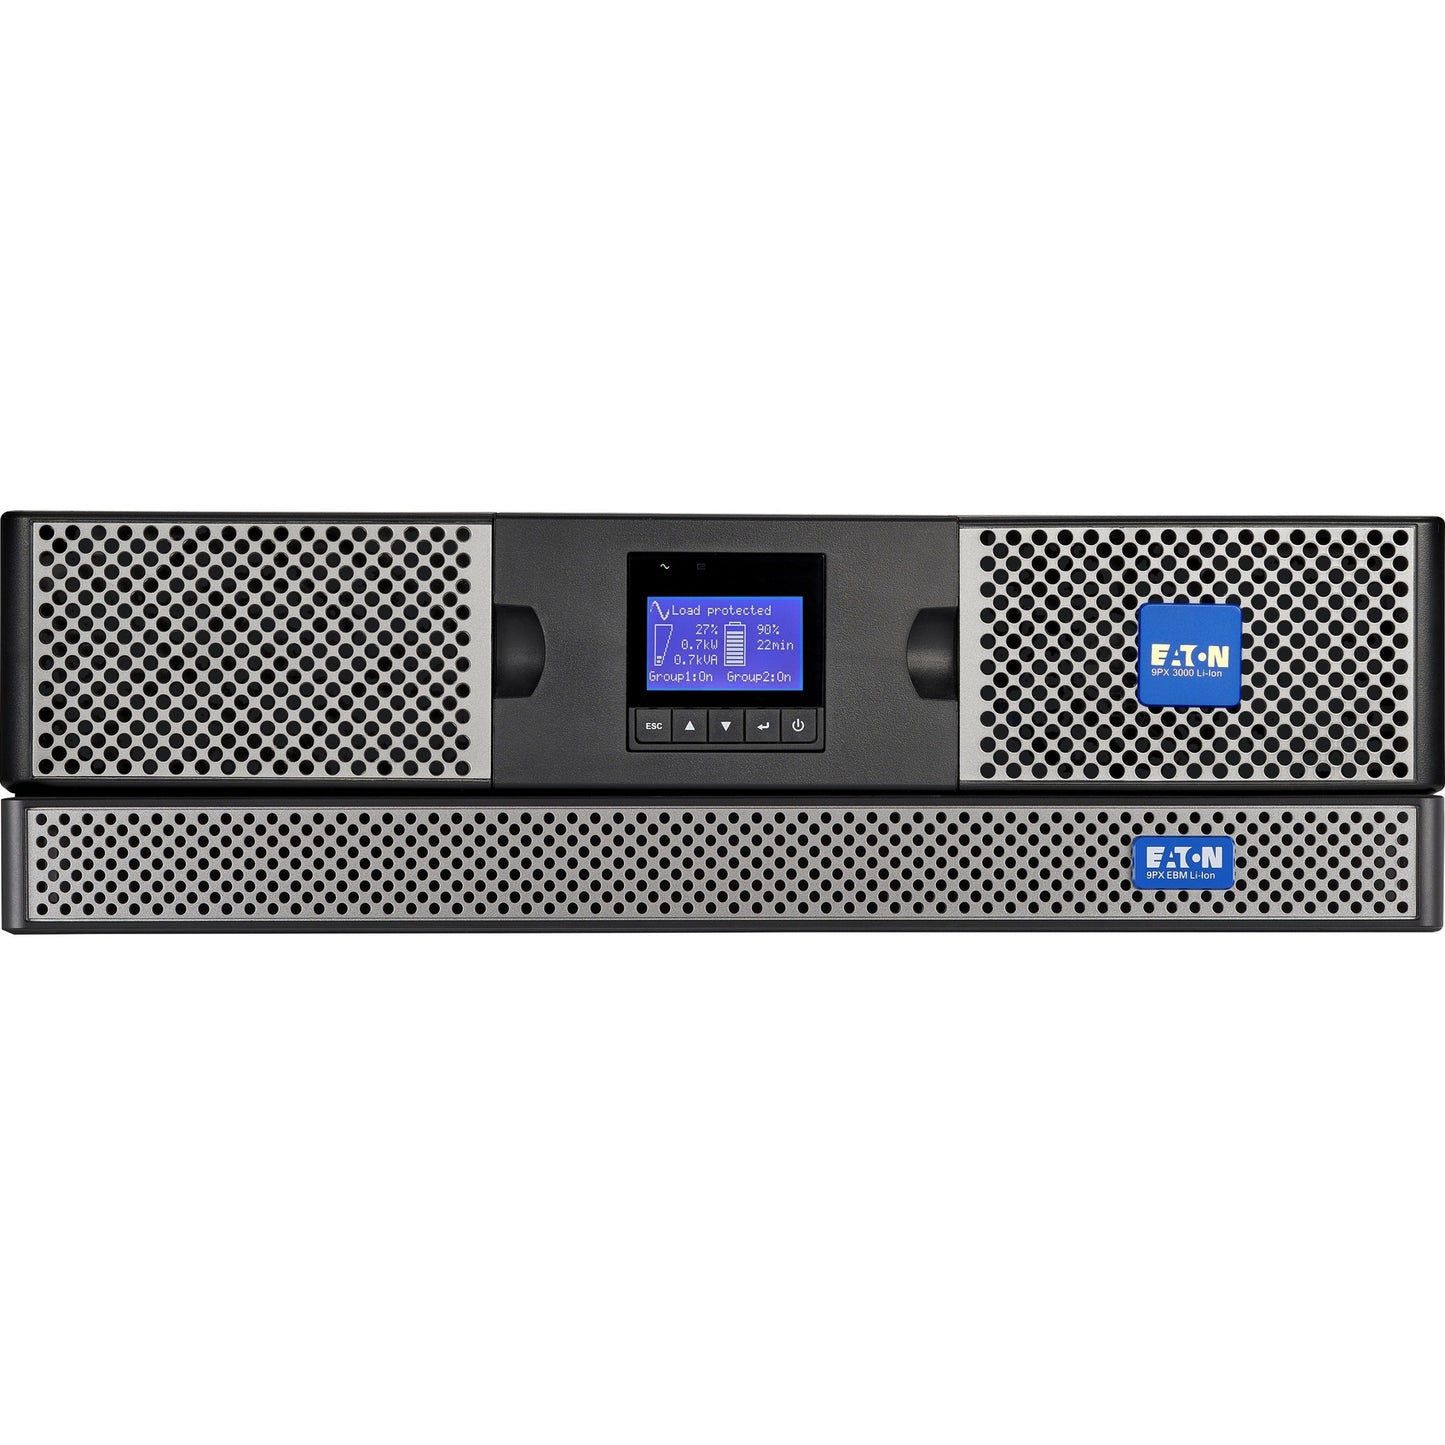 Eaton 9PX 3000VA 2400W 208V Online Double-Conversion UPS - L6-20P 8 C13 2 C19 Outlets Lithium-ion Battery Cybersecure Network Card Option 2U Rack/Tower